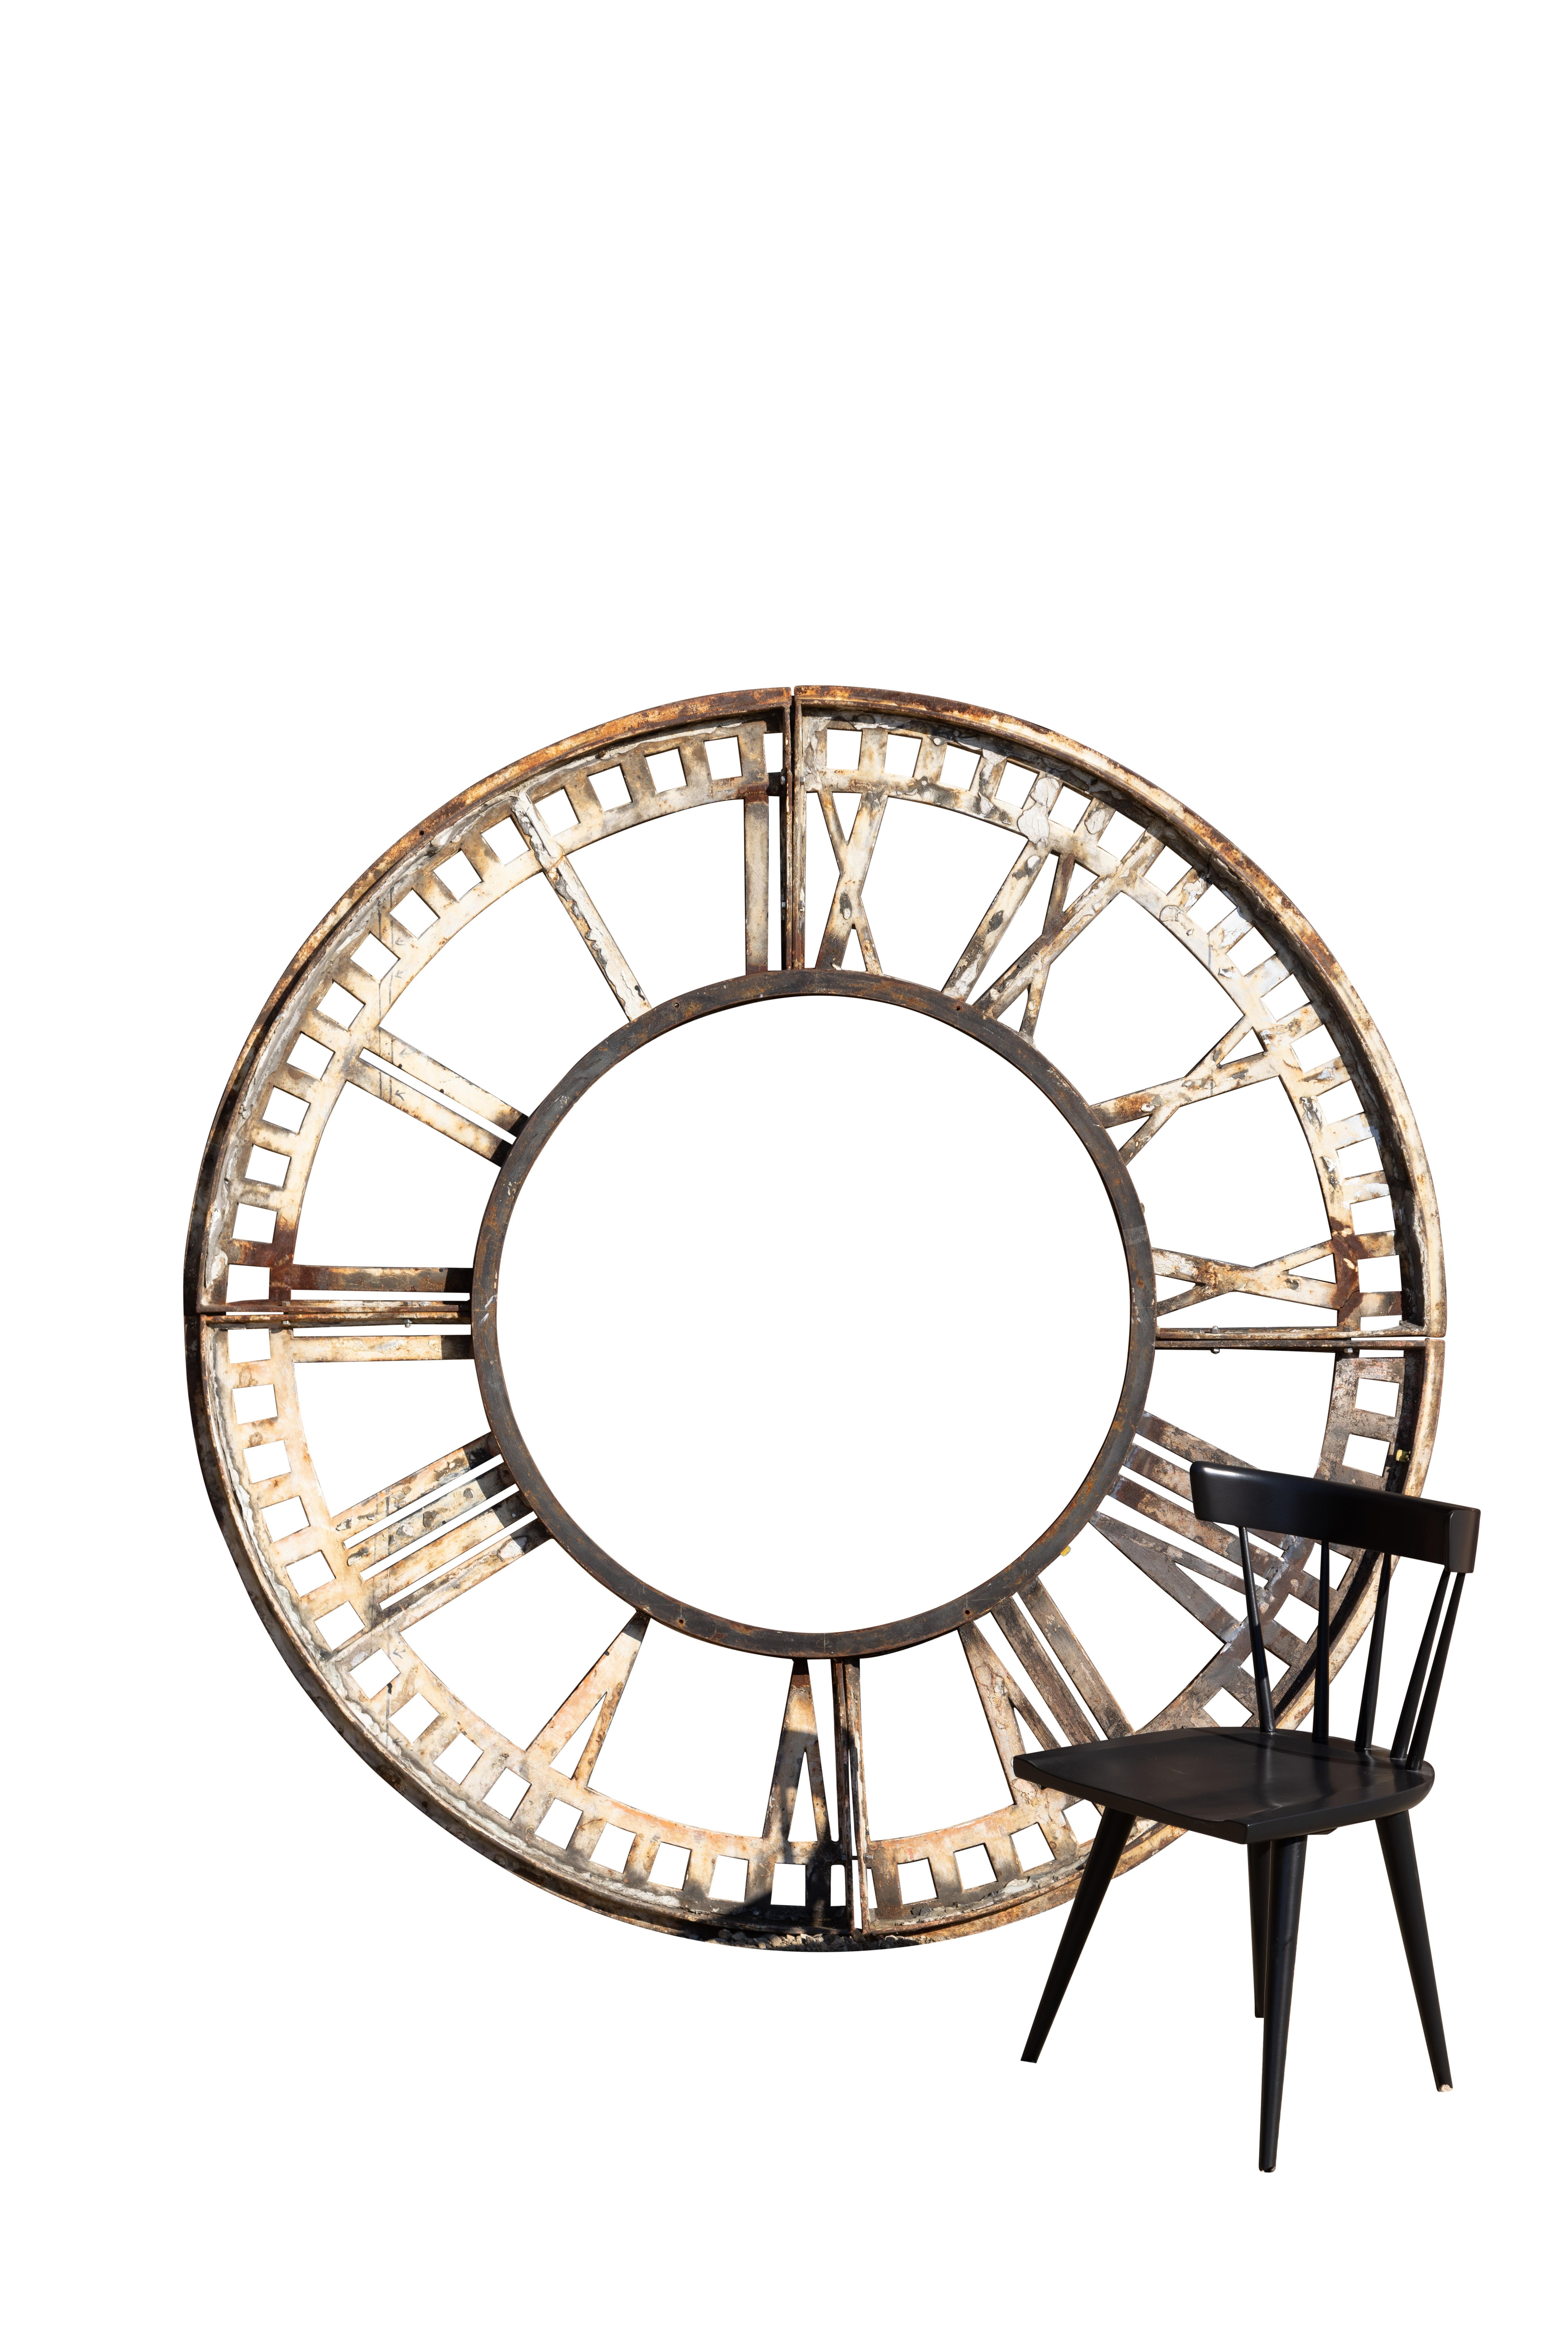 Forged Clock Frame from Original Penn Station Train Waiting Room, 6-ft diameter, c 1910 For Sale